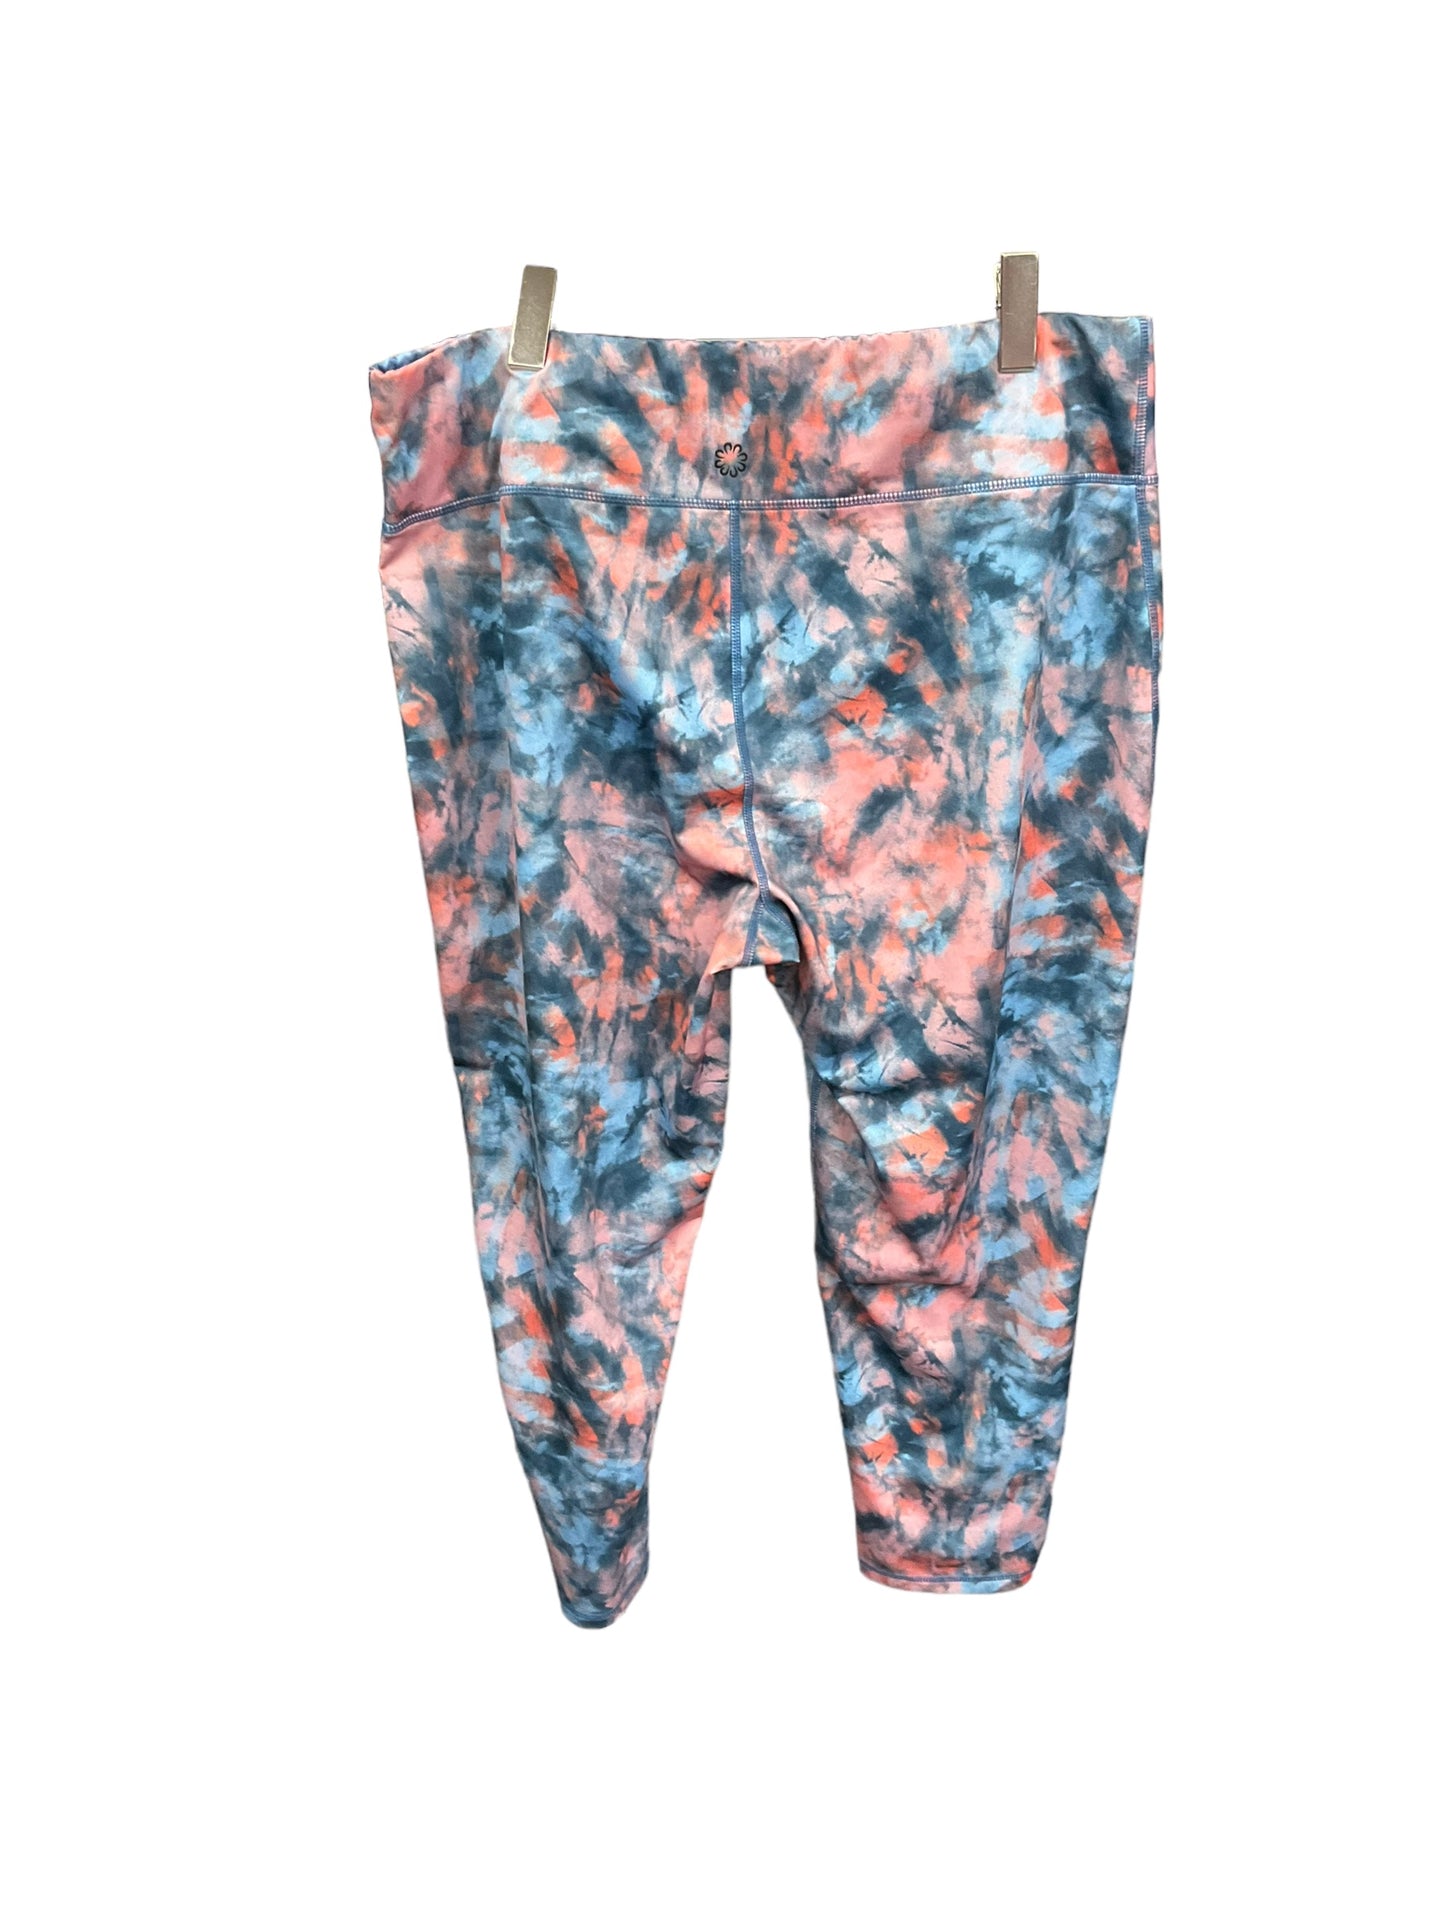 Leggings By Pro Player  Size: 2x